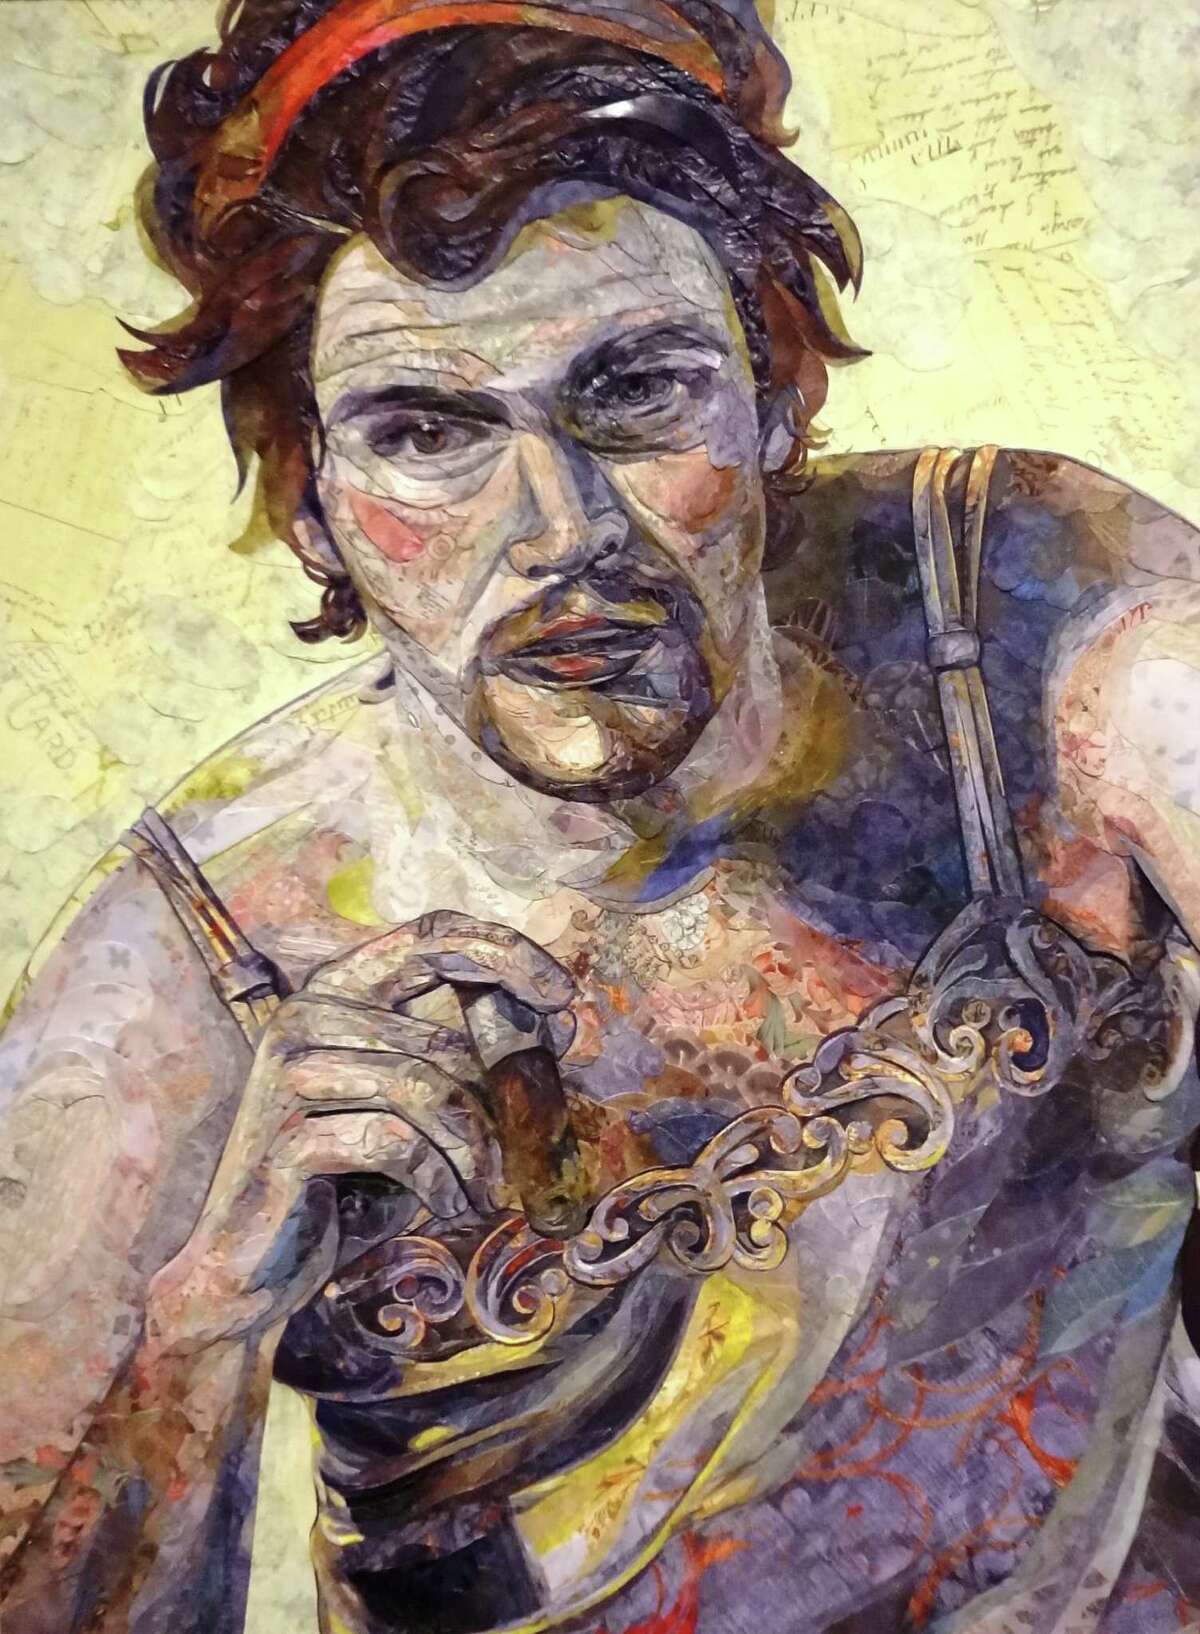 San Antonio artist Shannon Crider's paper collage portrait “John in Drag” took more than 200 hours to construct.